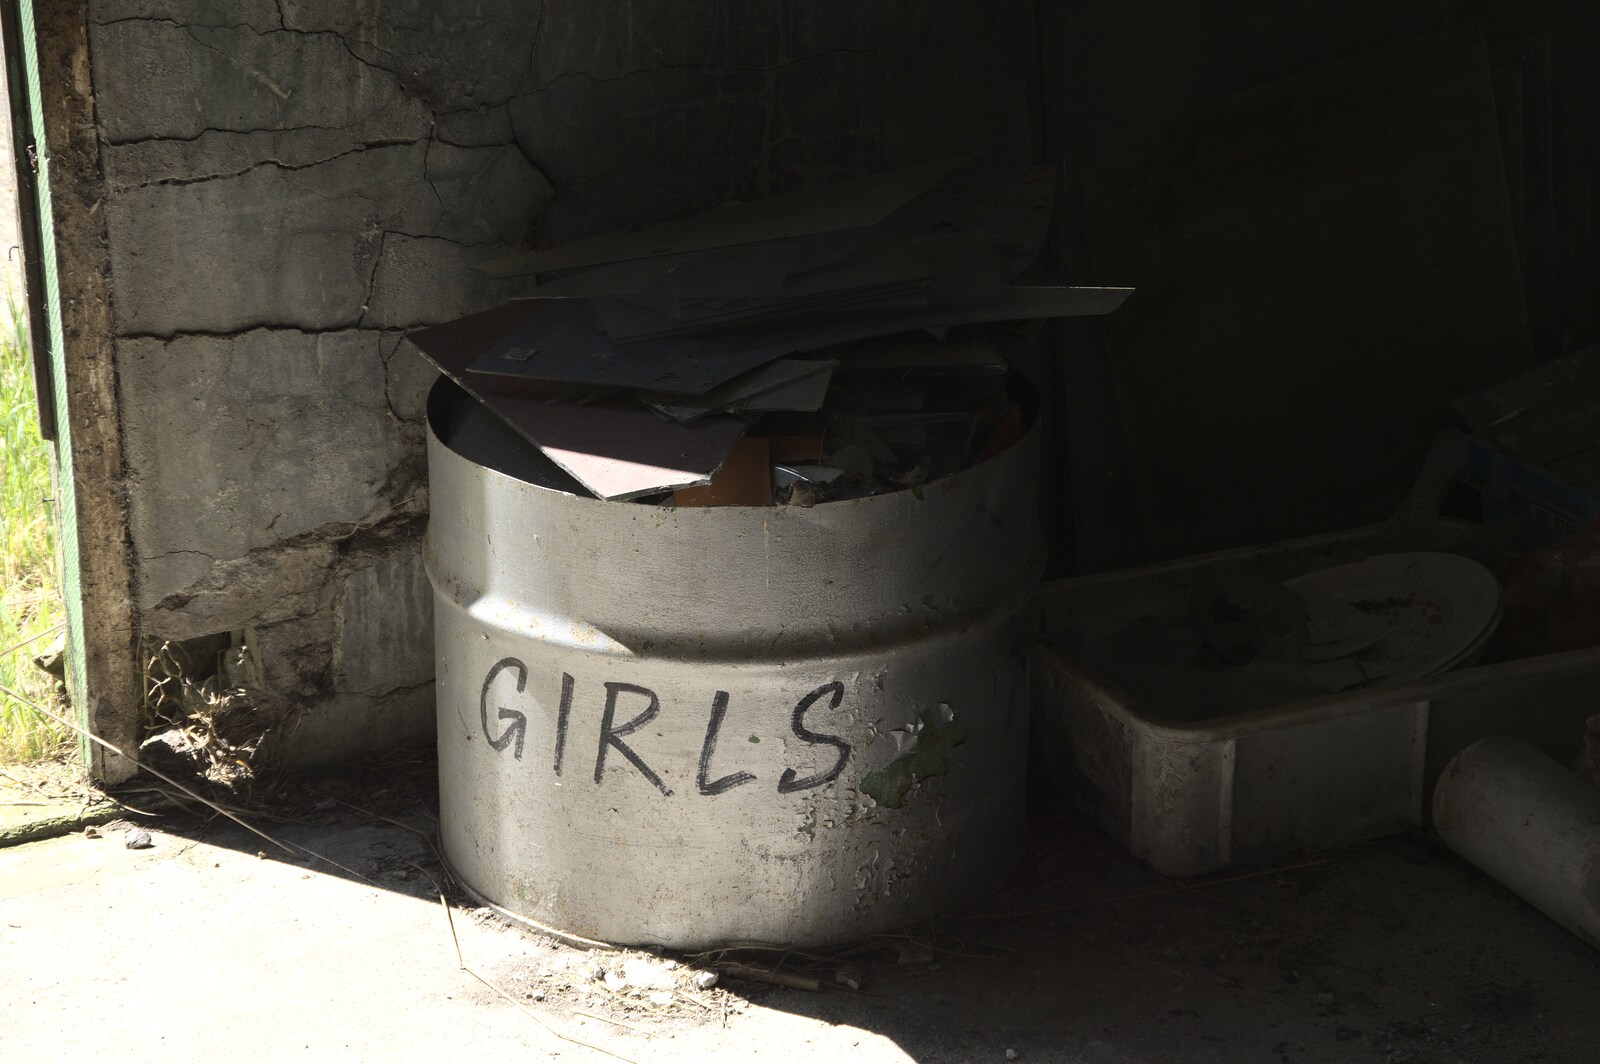 A tub simply says 'girls' from A 1940s Timewarp, Site 4, Bungay Airfield, Flixton, Suffolk - 9th June 2022